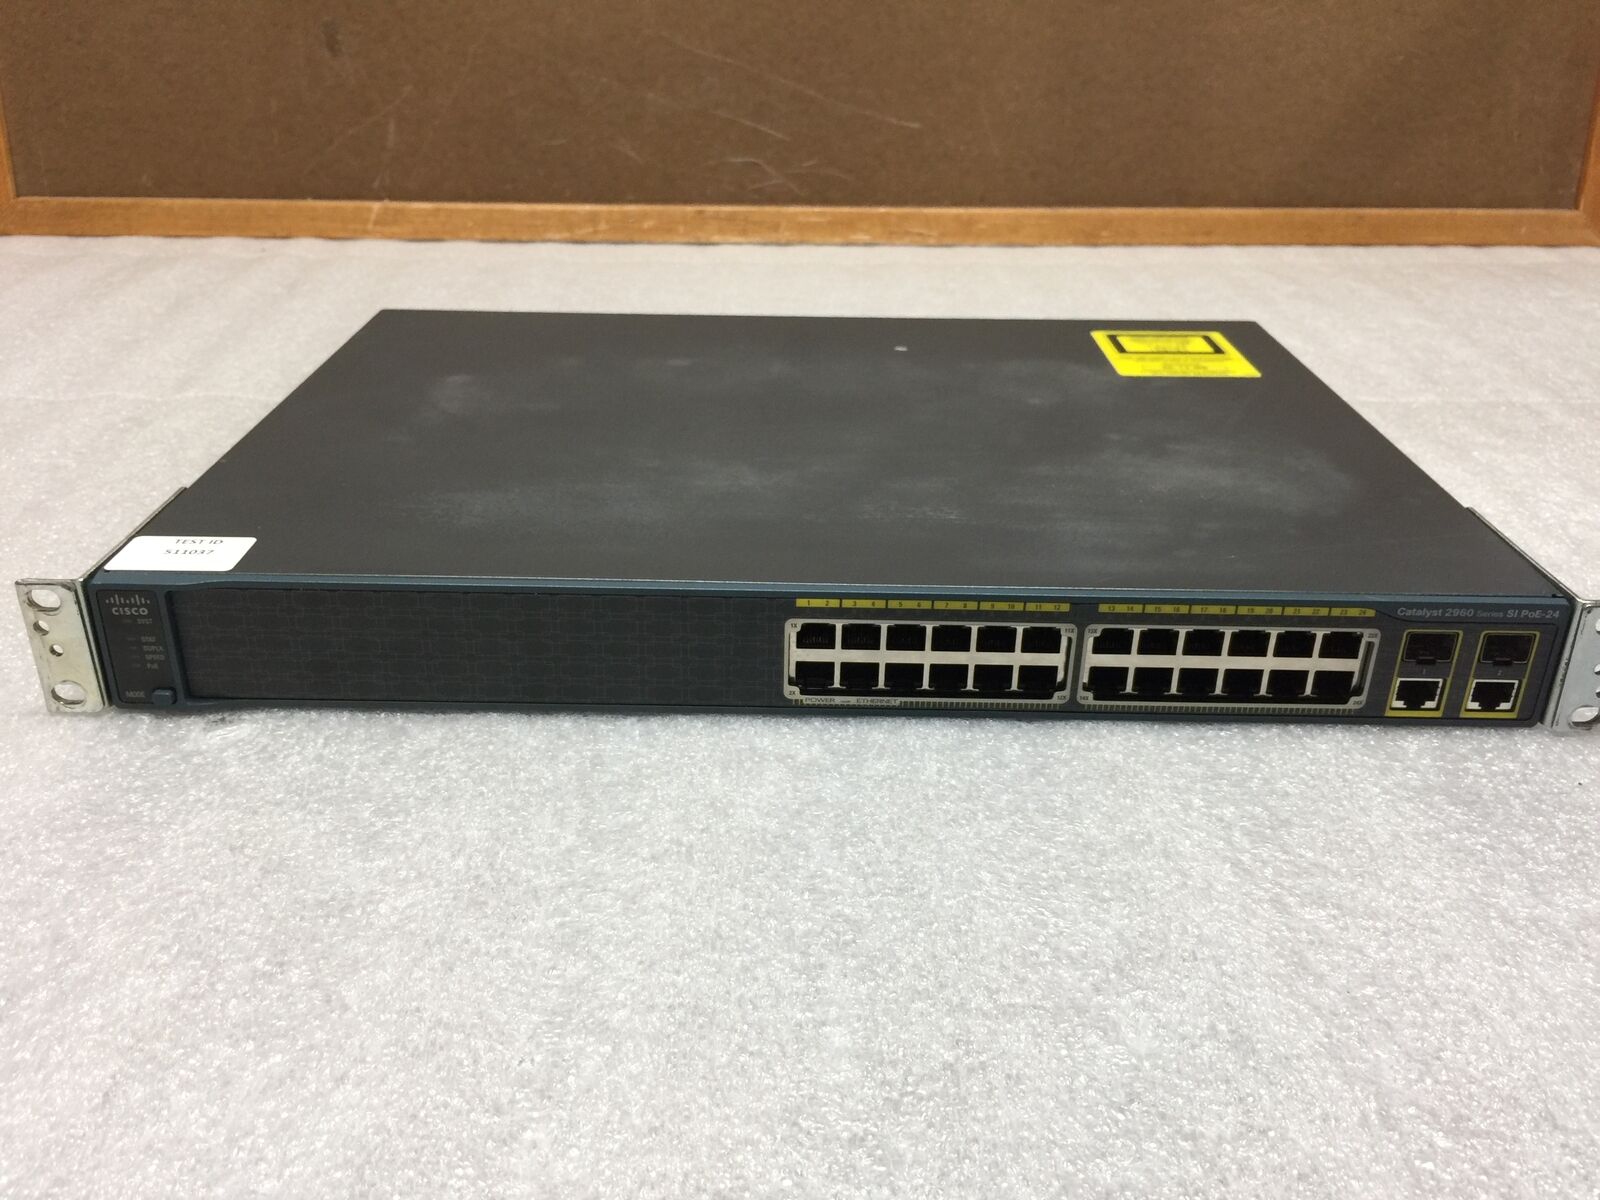 Cisco WS-C2960-24PC-S V04 Catalyst 2960 24-PT 10/100 Ethernet Switch, Tested